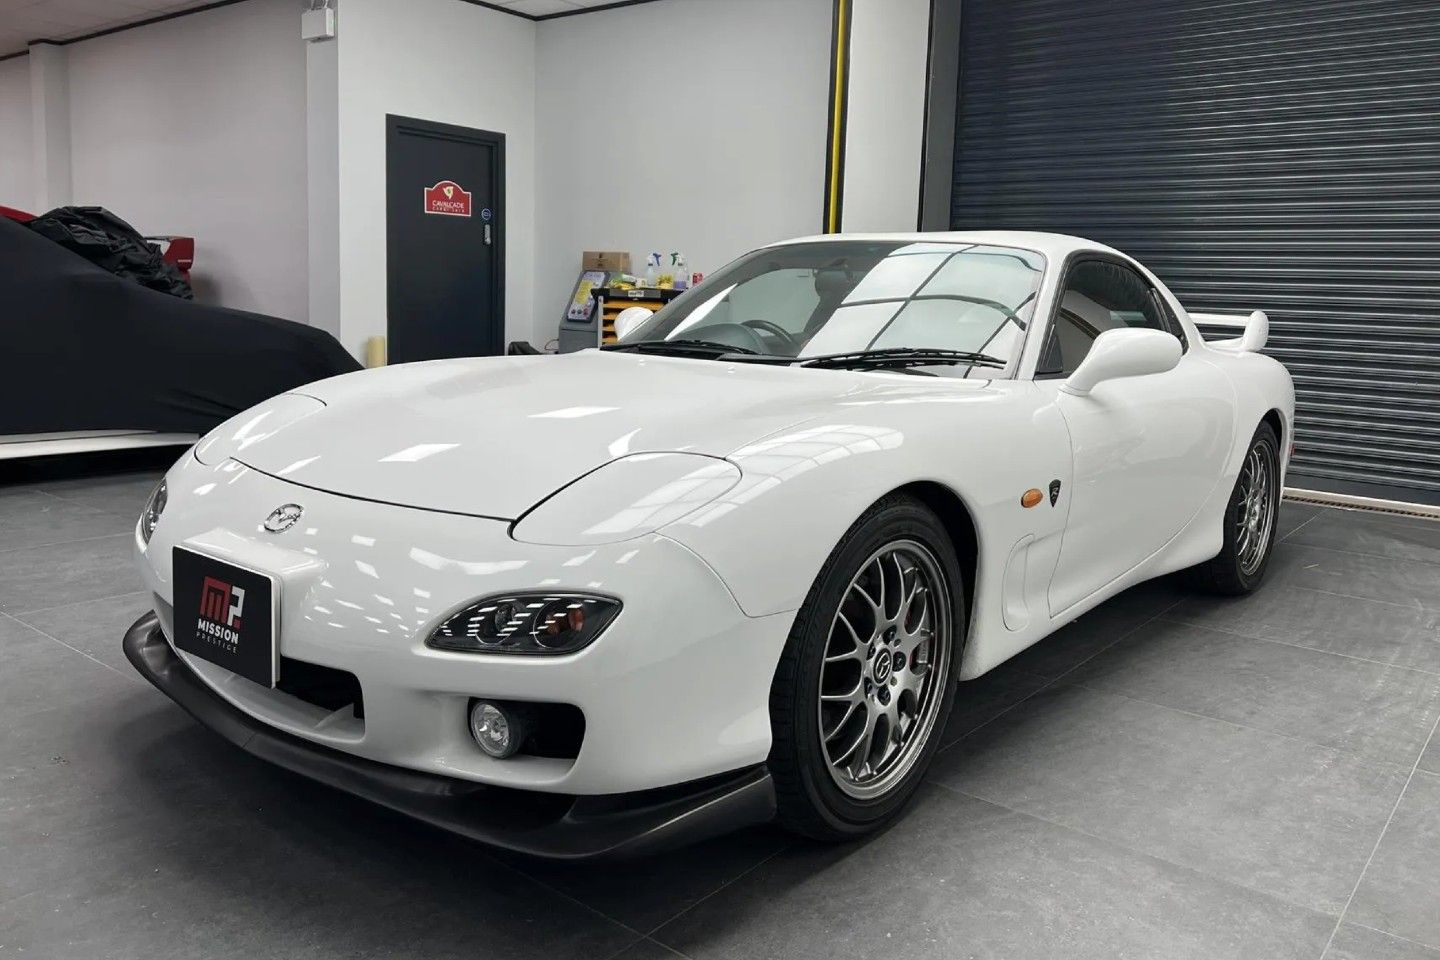 A Brief History of the Mazda RX-7 - Everything You Need To Know